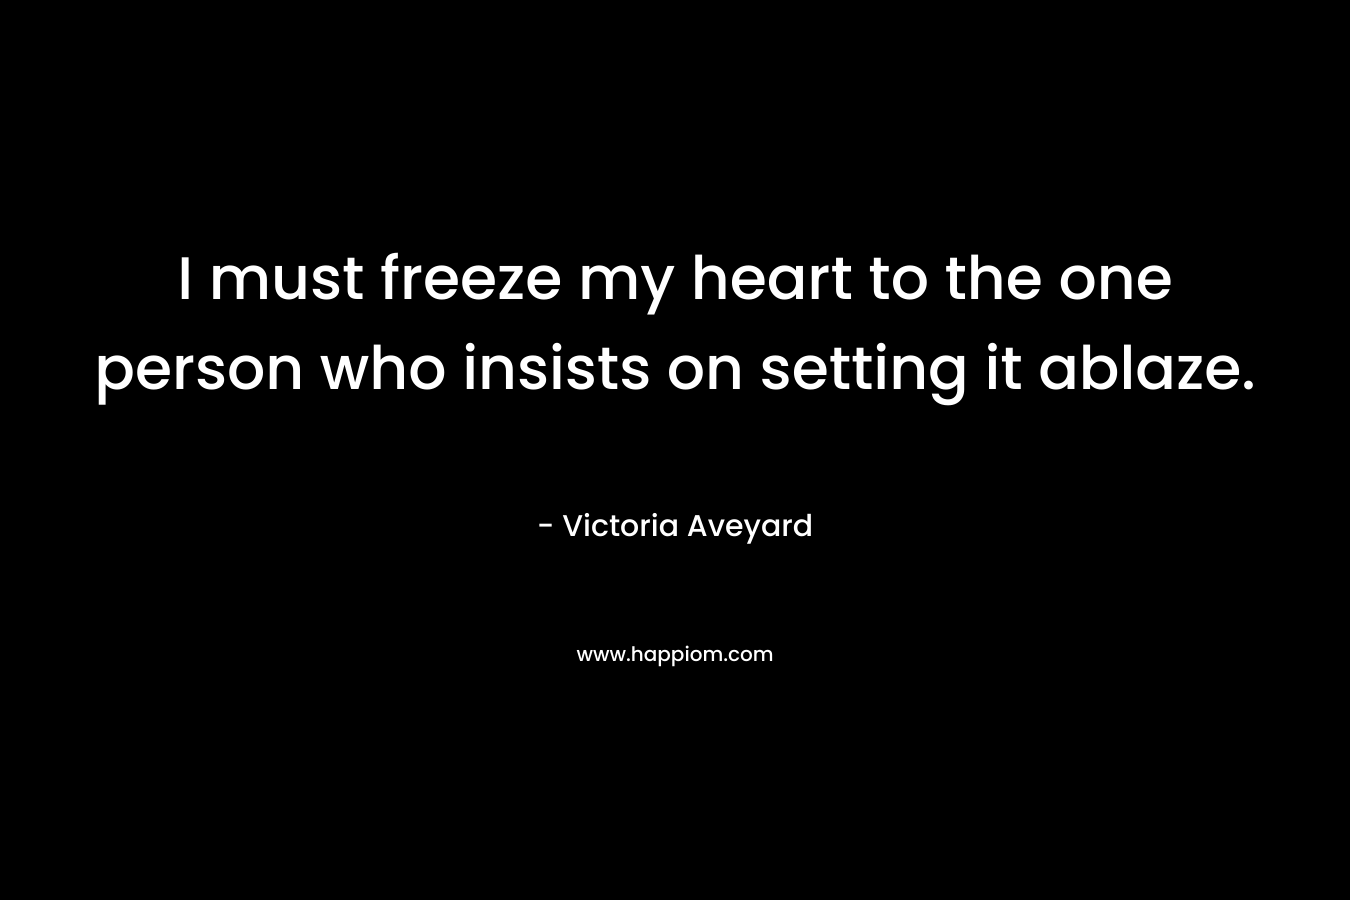 I must freeze my heart to the one person who insists on setting it ablaze. – Victoria Aveyard